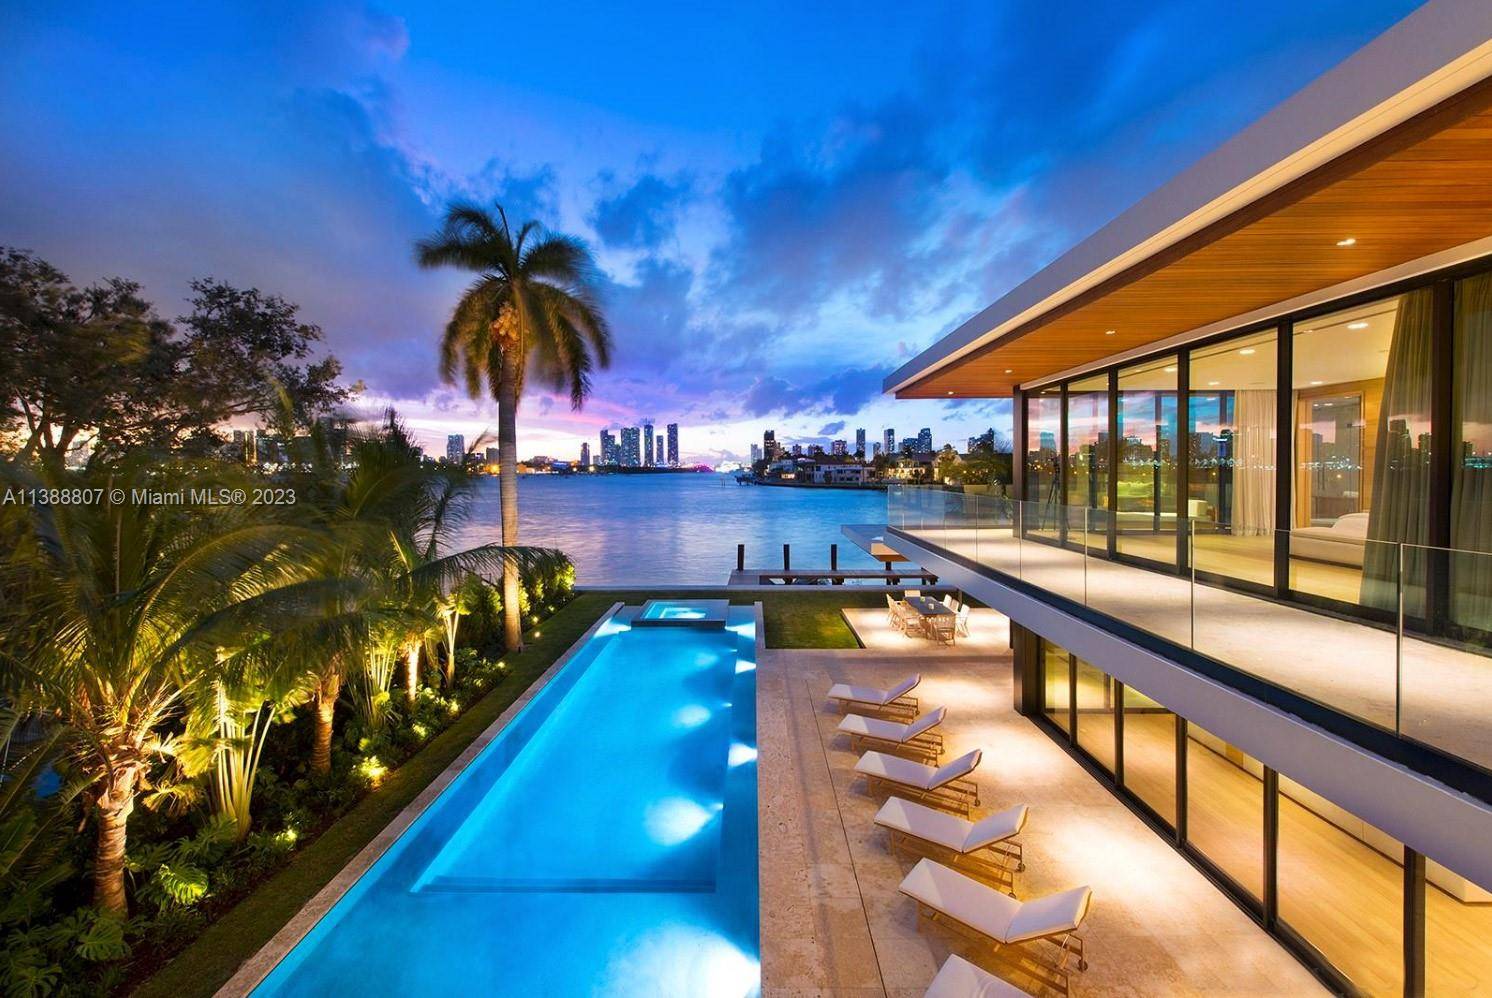 THE ULTIMATE POST CARD VIEW OF DOWNTOWN MIAMI SKYLINE ON THE BAY THIS TROPICAL MODERN WATERFRONT ESTATE SITS ON THE BEST LOCATION OF SAN MARINO ISLAND !